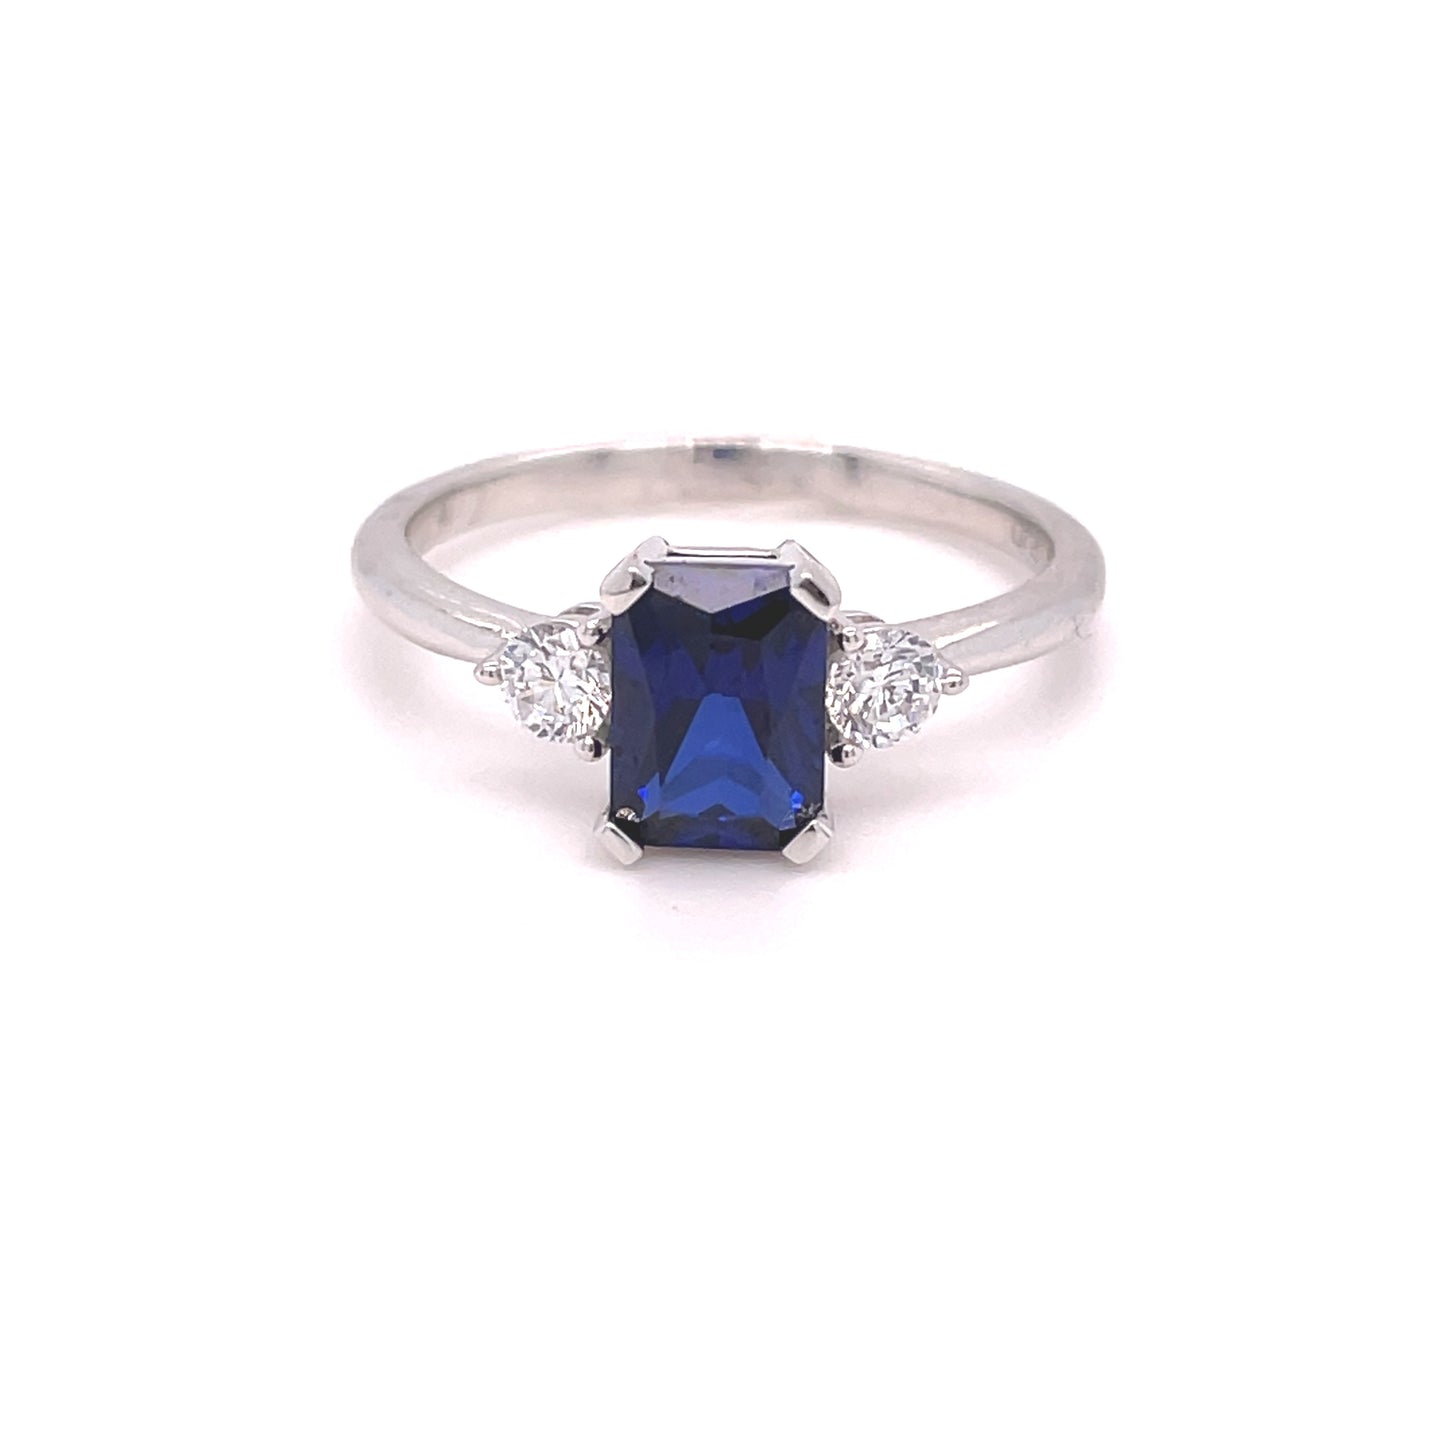 9ct White Gold Emerald Cut Sapphire Ring With CZ Shoulders